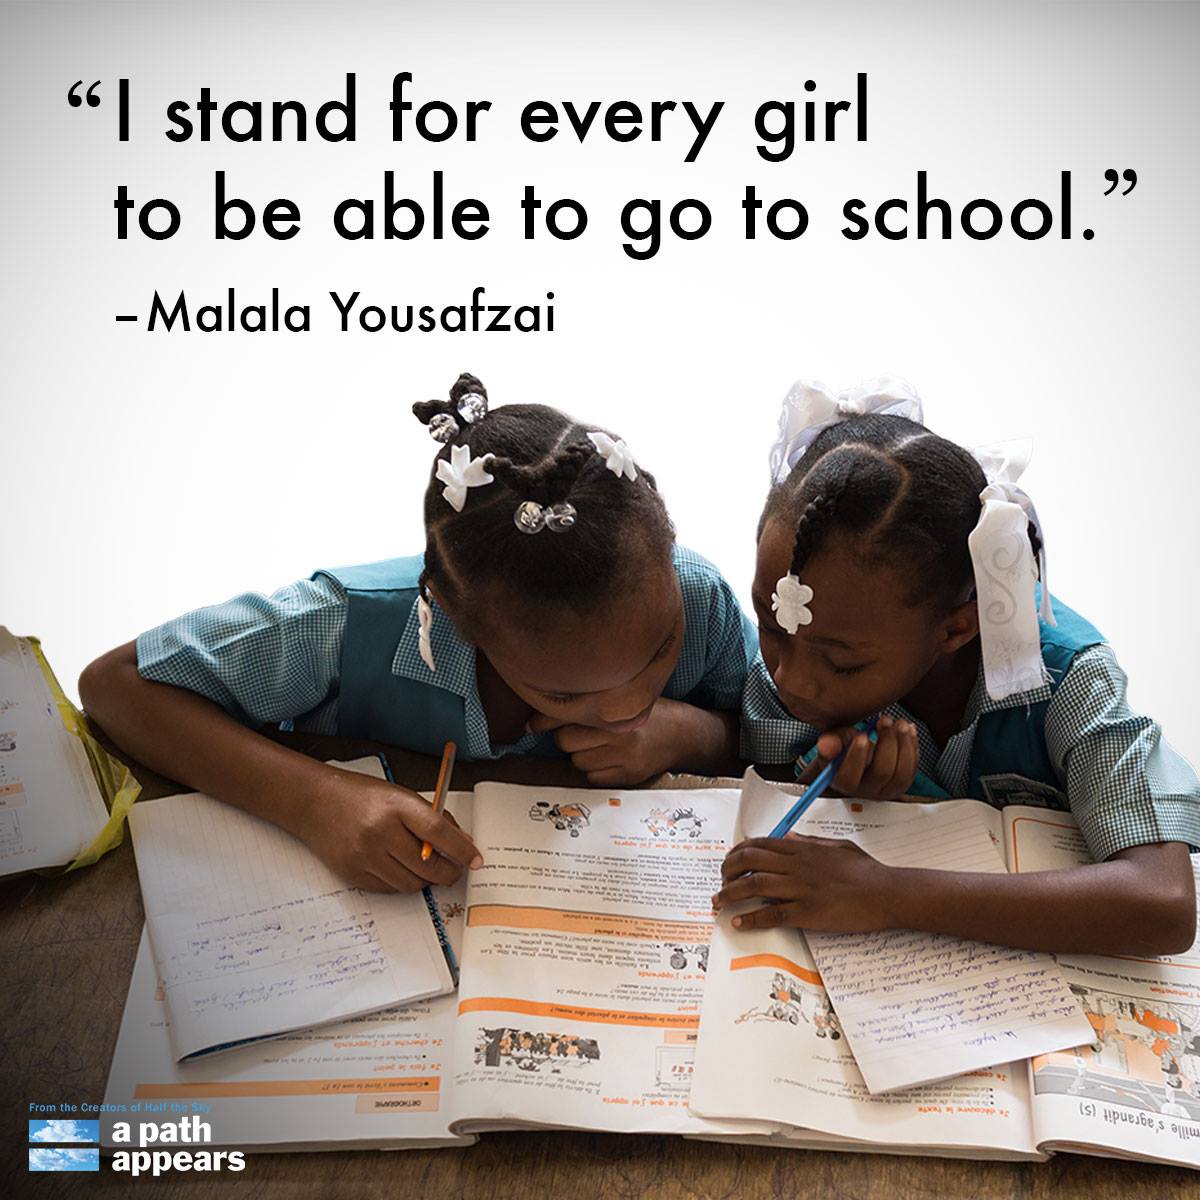 RT @APathAppears: An educated girl knows her value. #GirlsLead15 #LetGirlsLearn cc: @FLOTUS http://t.co/K7BP3b4Duo http://t.co/QxkNGaXXF0